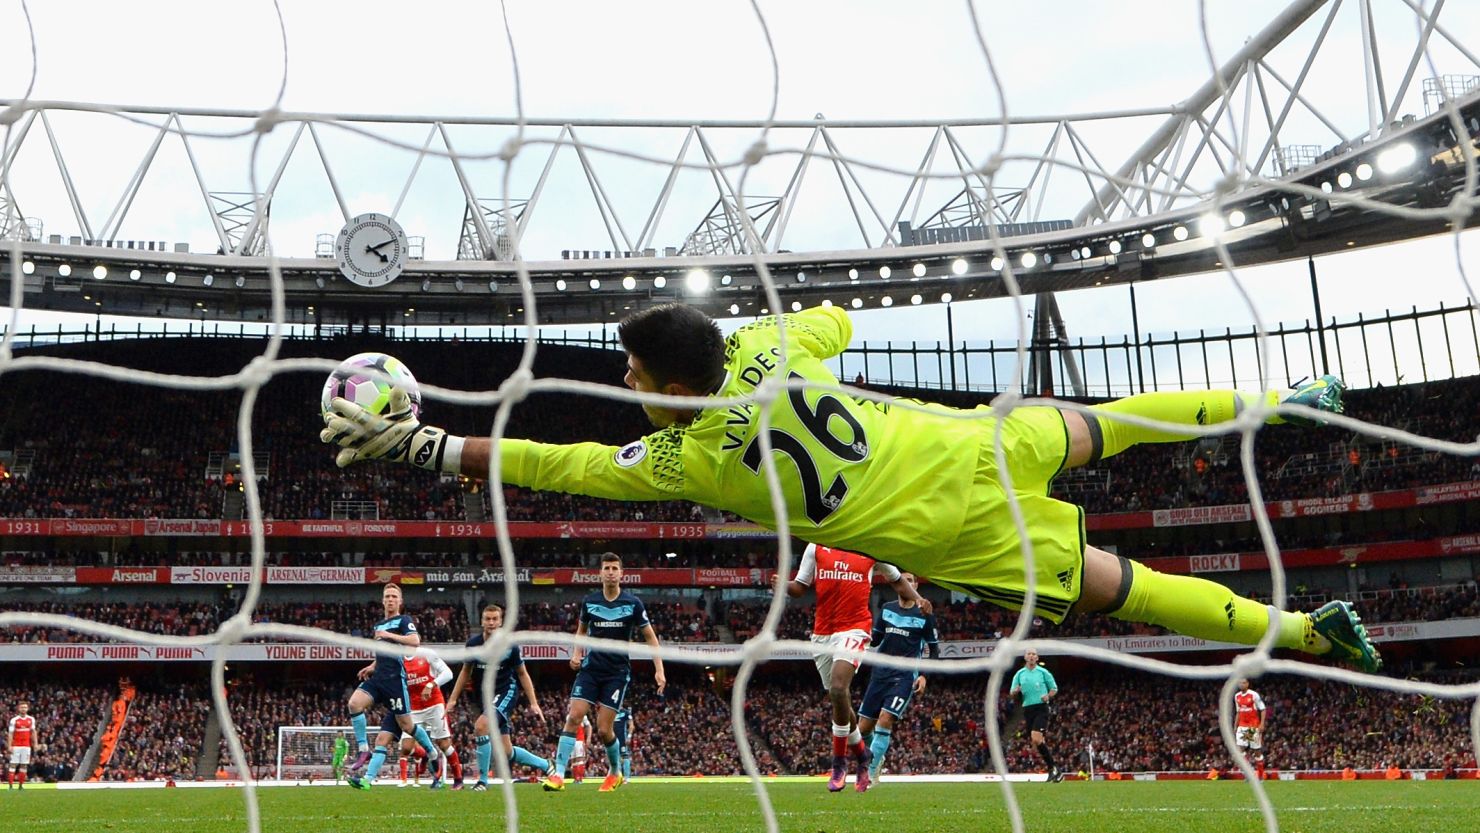 Middlesbrough's Victor Valdes kept his side in the game against Arsenal, helping to earn a point.